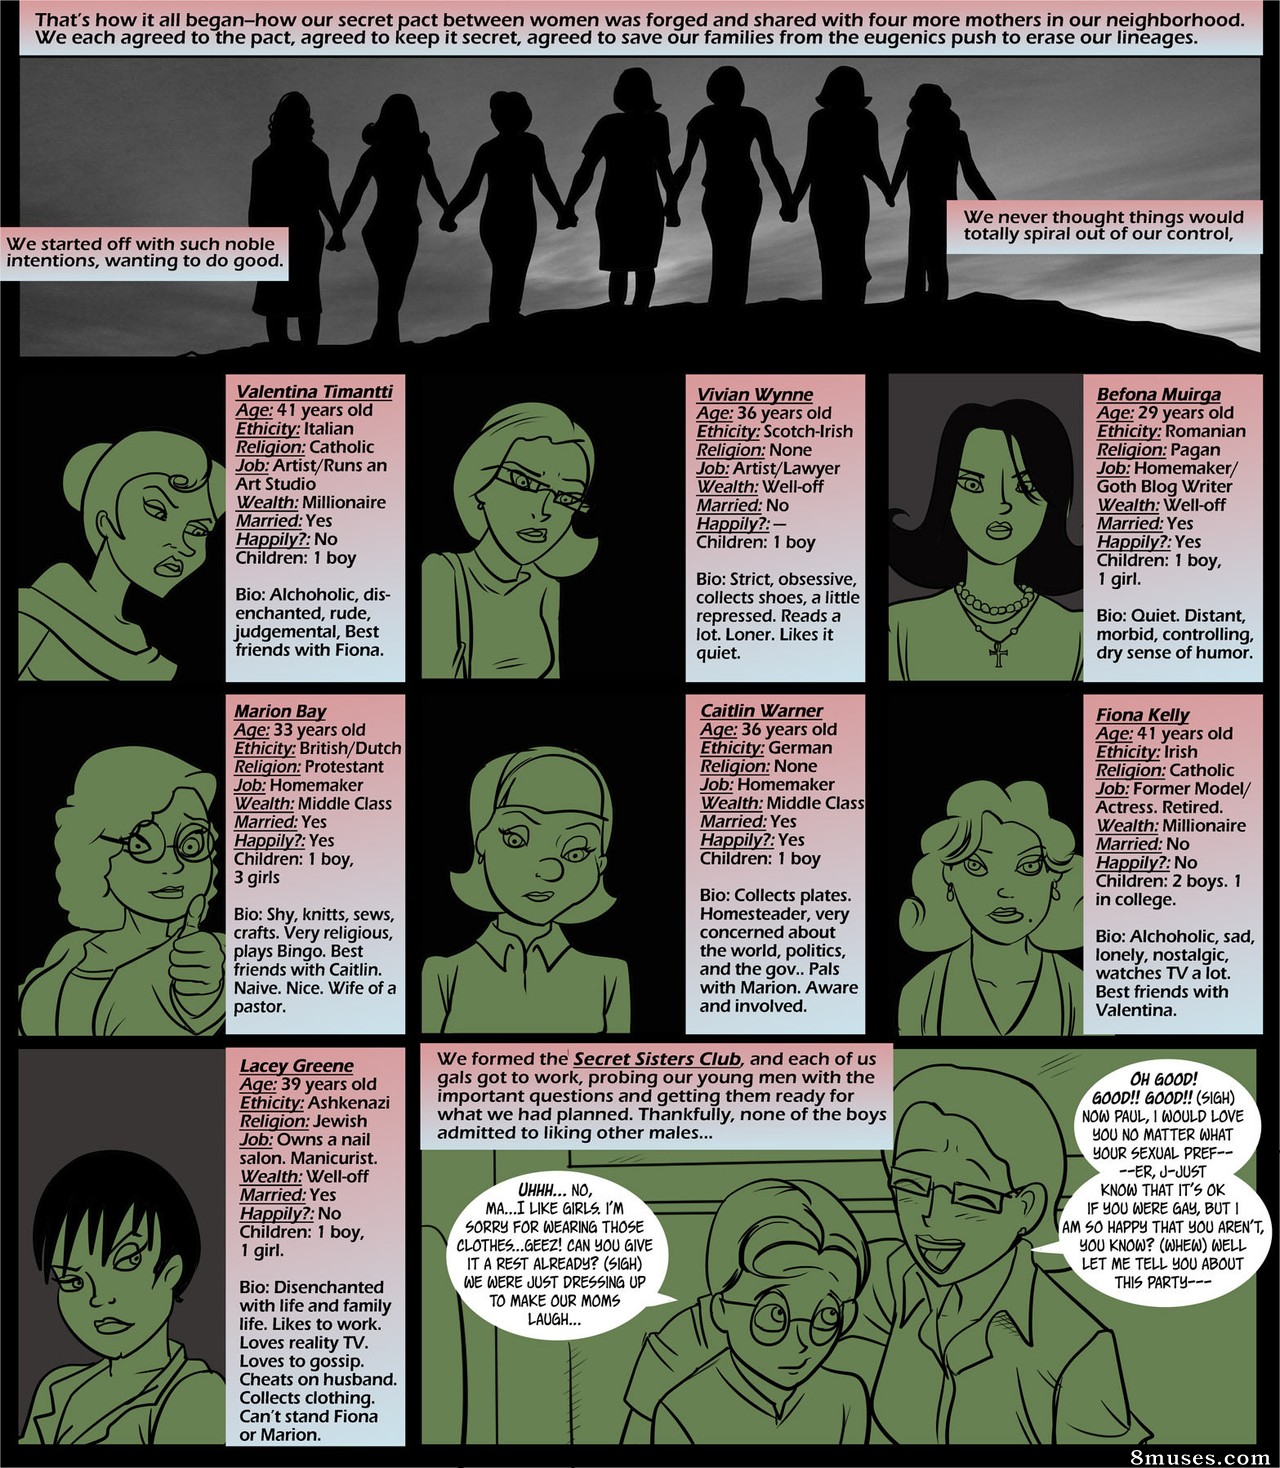 Page 4 Everfire-Comics/Diary-of-a-Secret-Neighborhood-Wives-Milf-Club 8muses pic picture